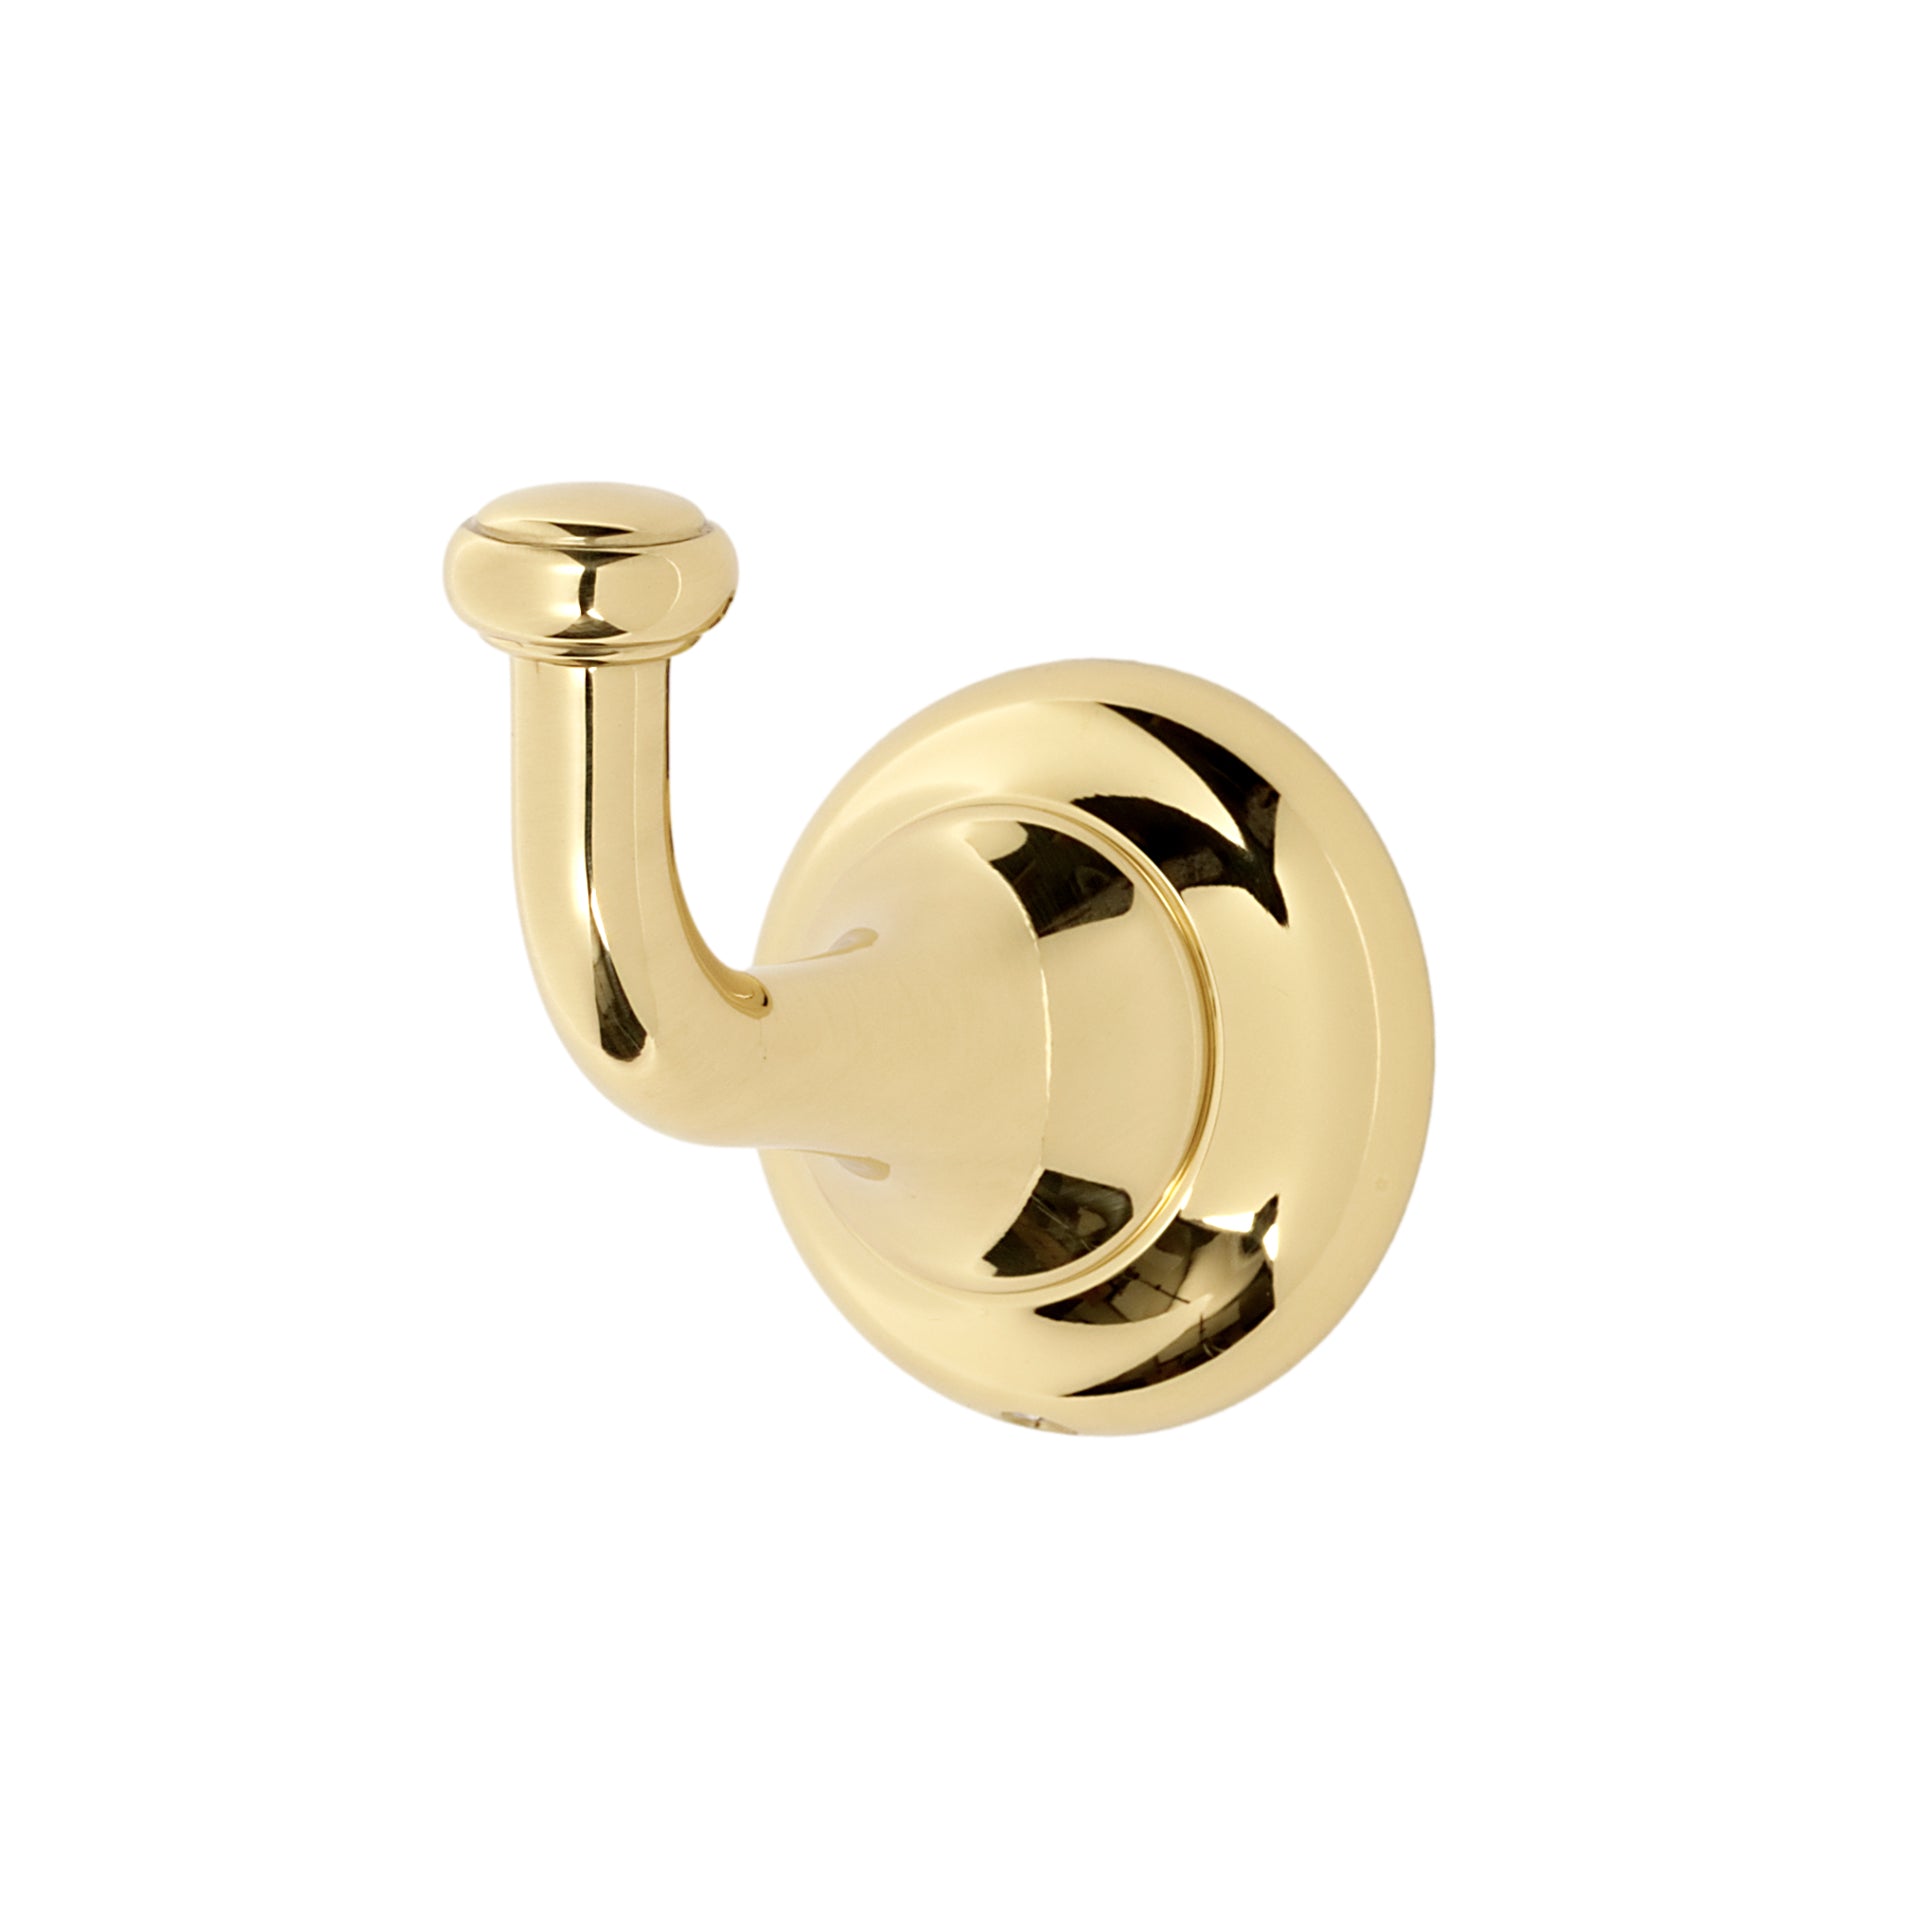 Polished Unlacquered Brass Royale Wall Coat Hook - Industry Hardware